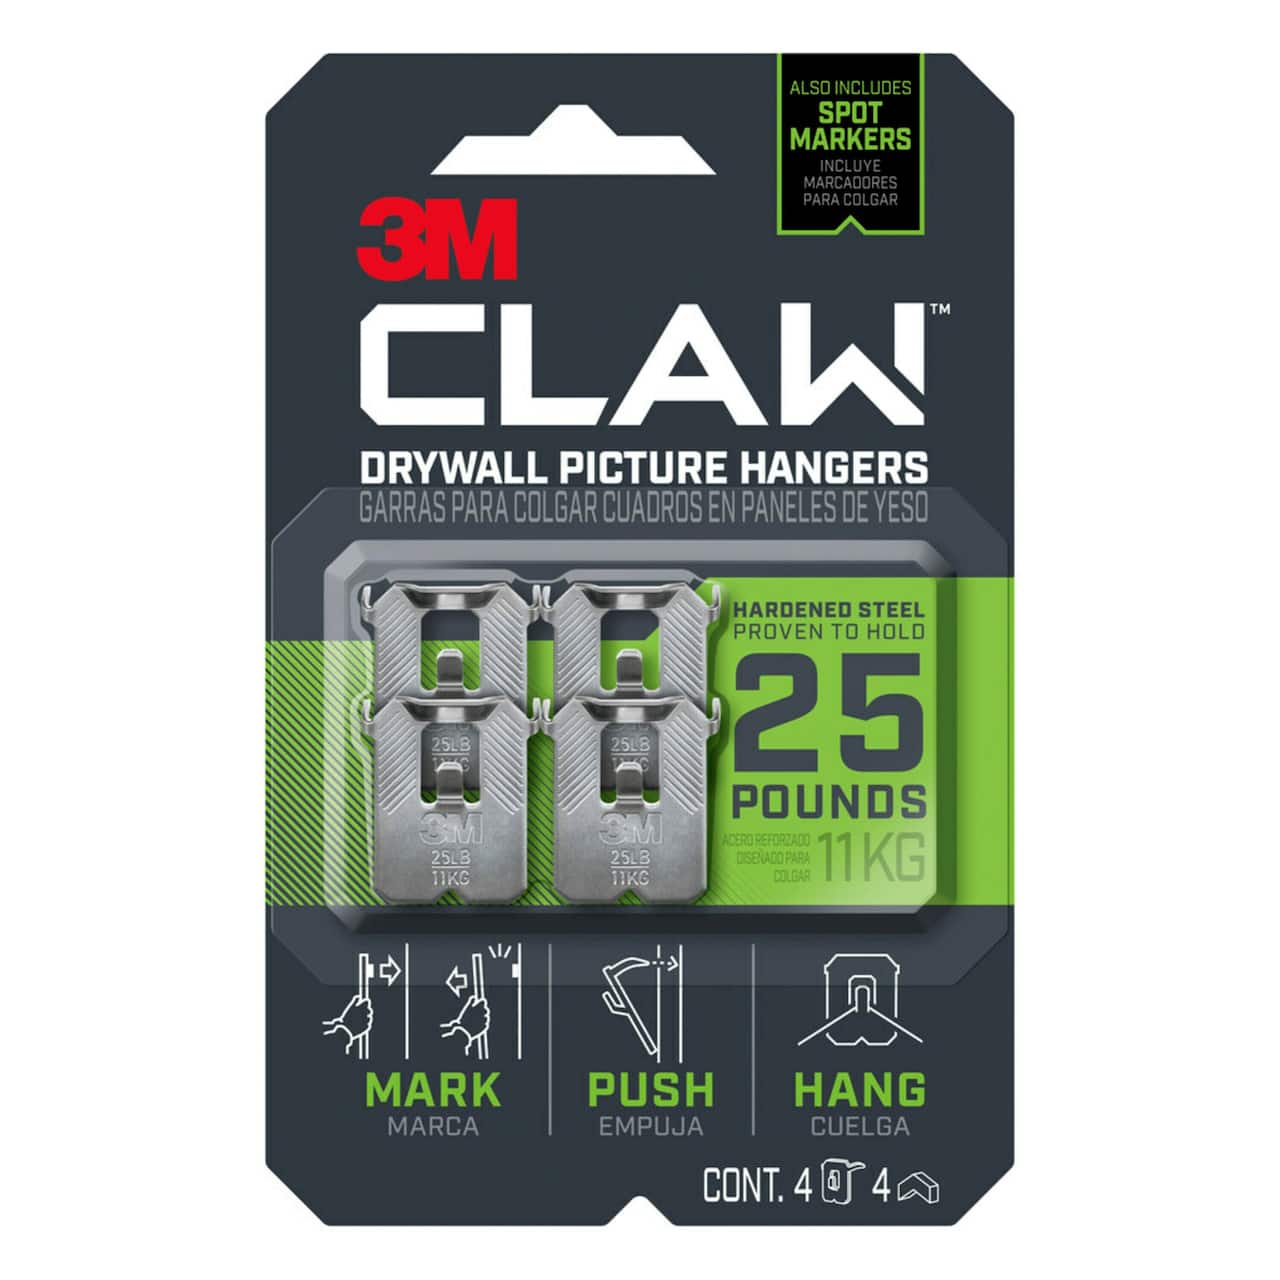 12 Packs: 4 ct. (48 total) 3M CLAW&#x2122; 25lb. Drywall Picture Hangers